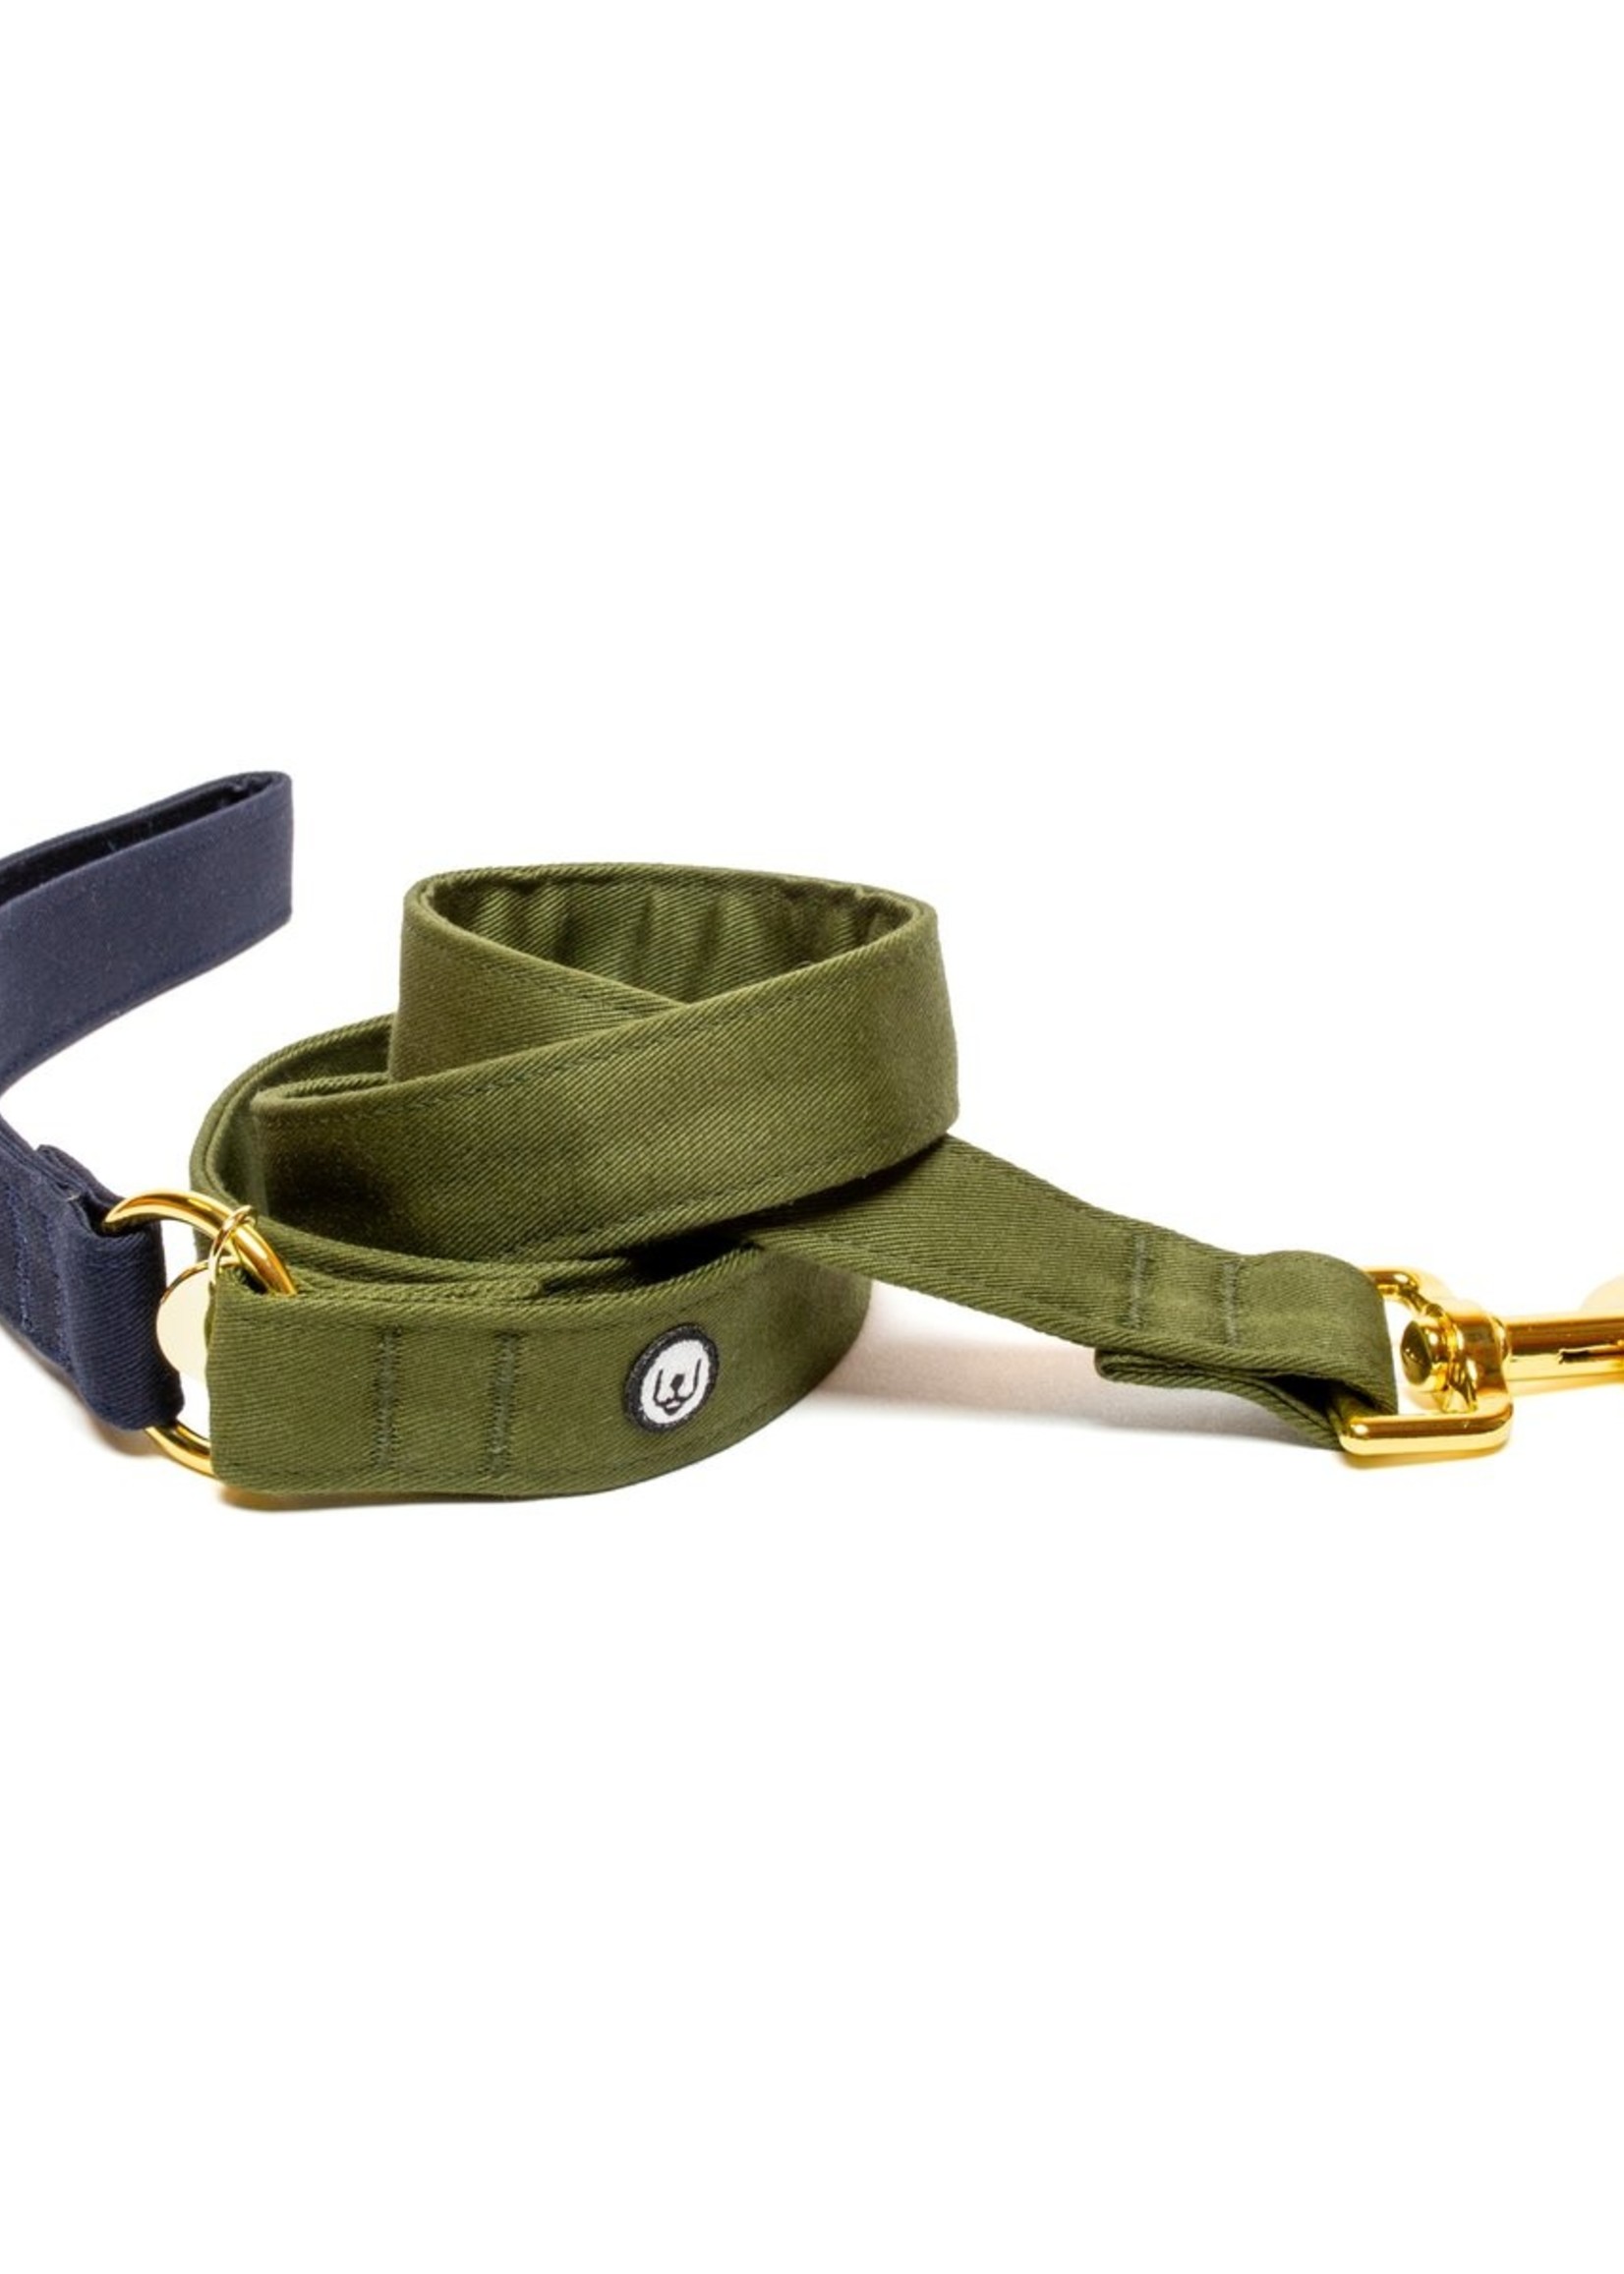 Eat Play Wag Eat Play Wag - Navy Olive Leash